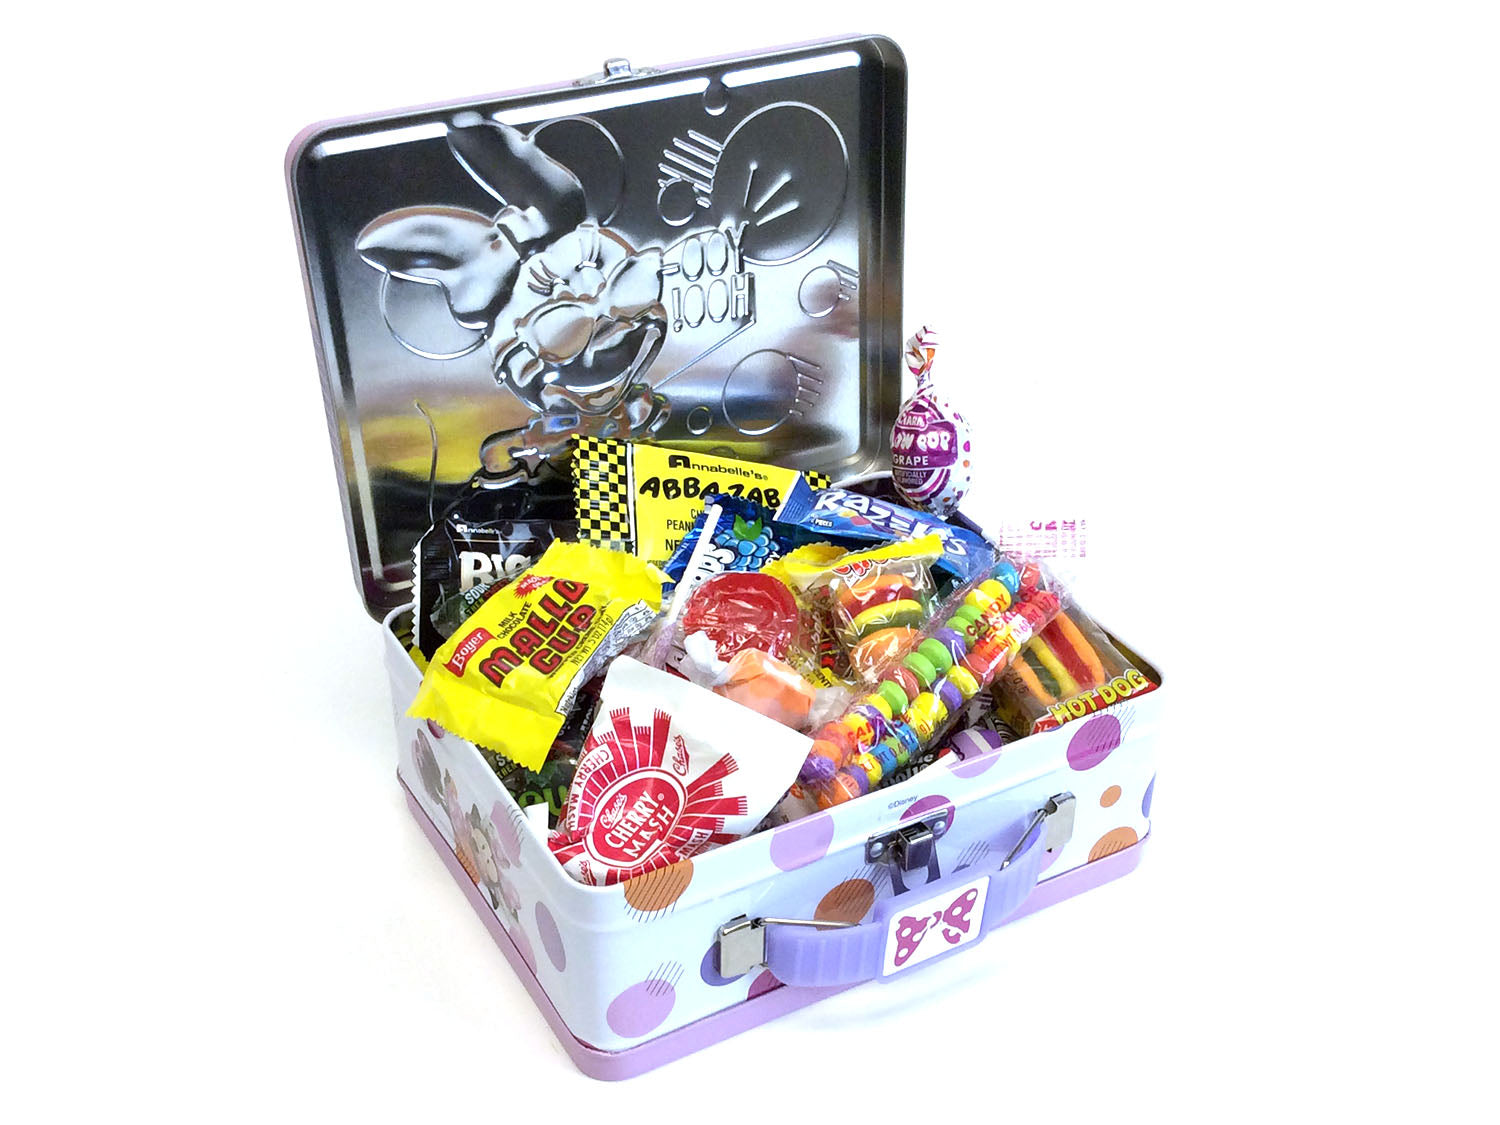 Lunch Box - Minnie Mouse with Sunglasses - Penny Candy Assortment